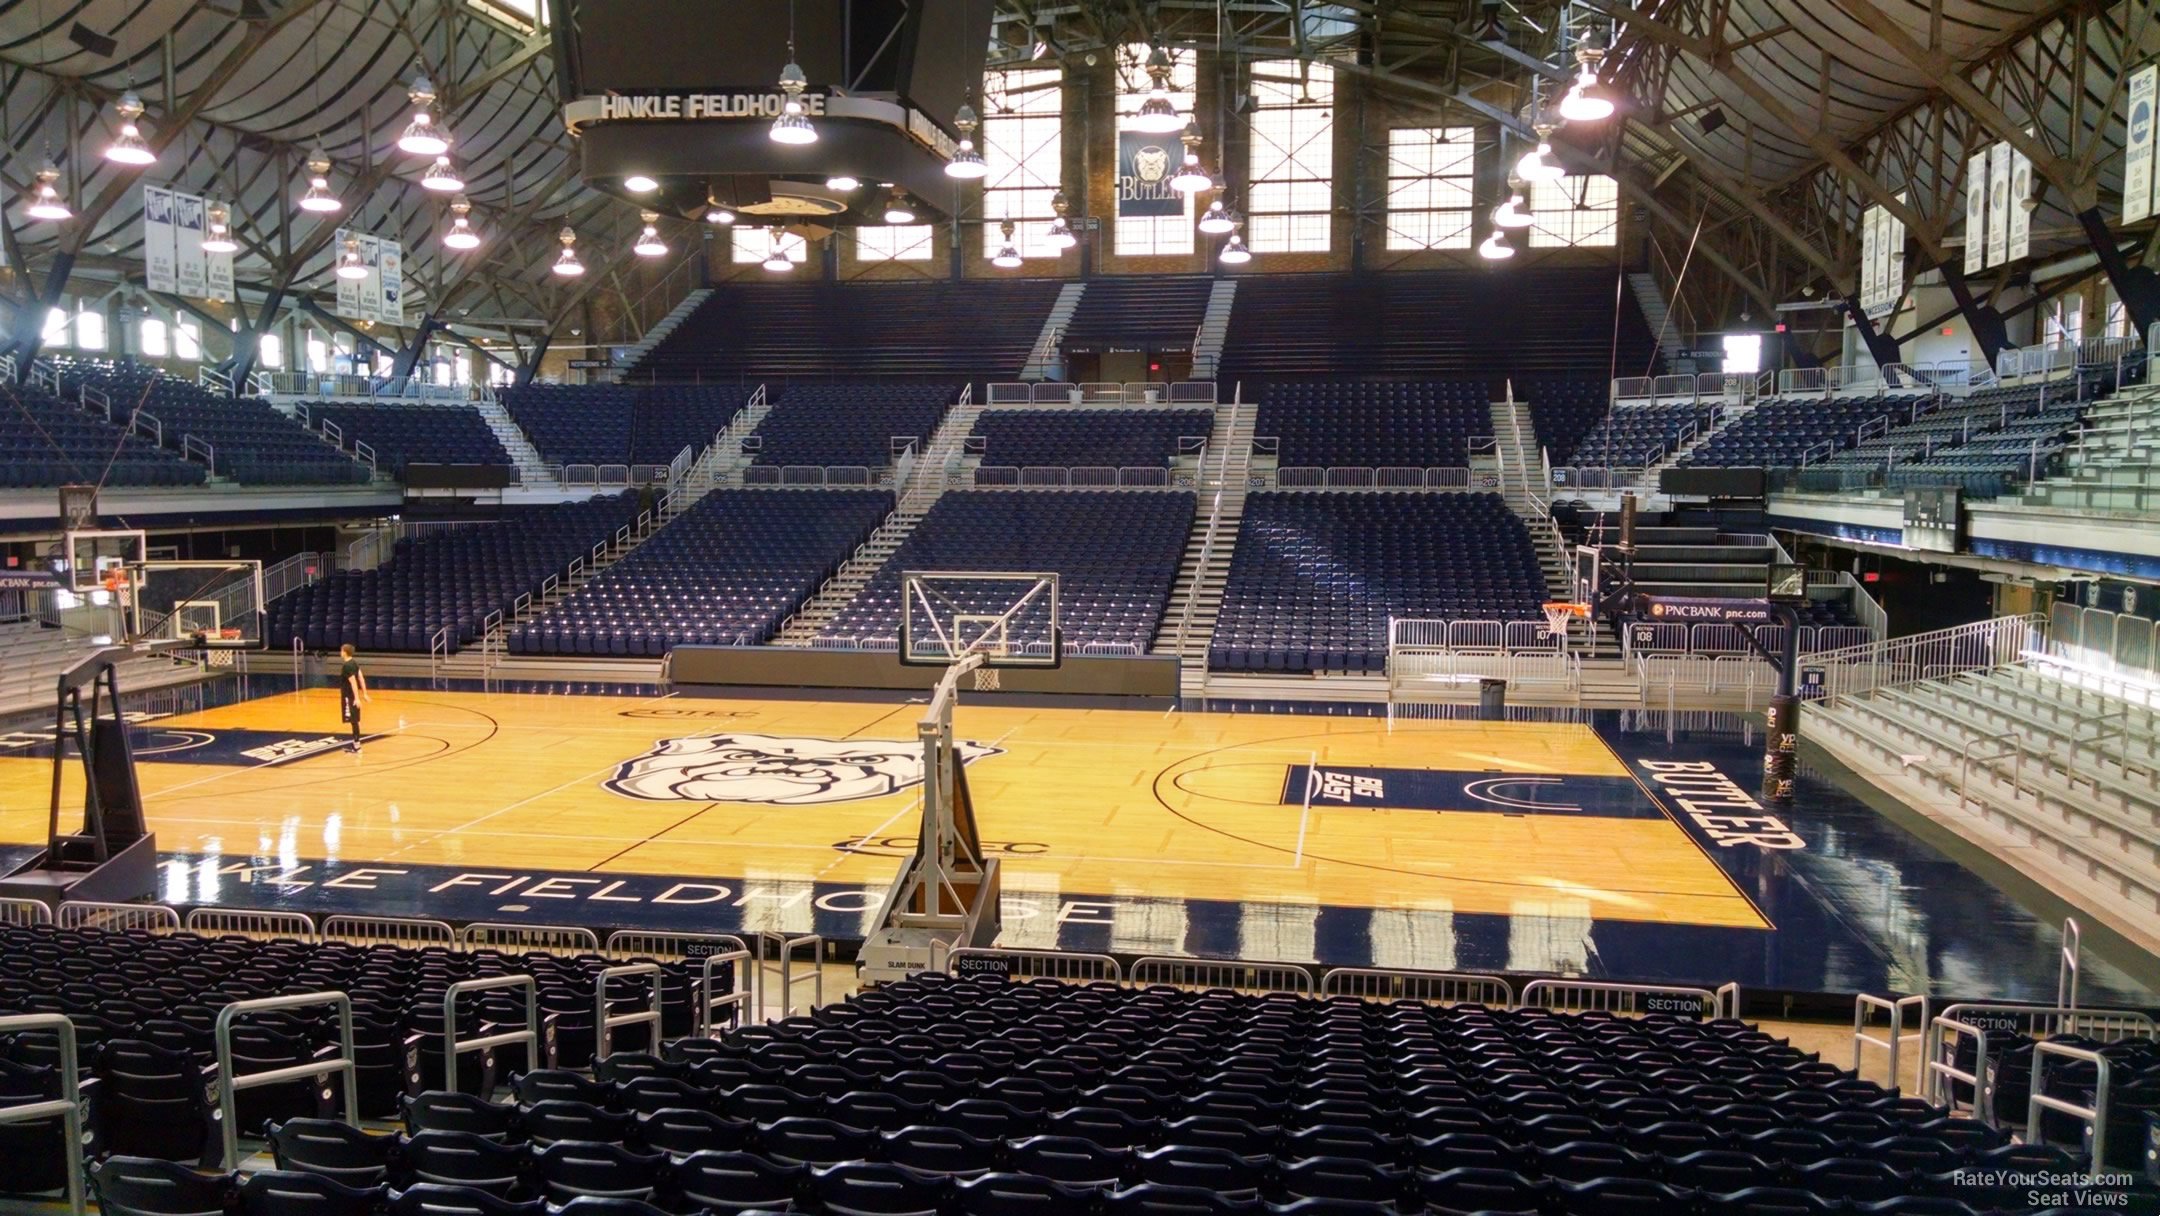 section 117, row 18 seat view  - hinkle fieldhouse